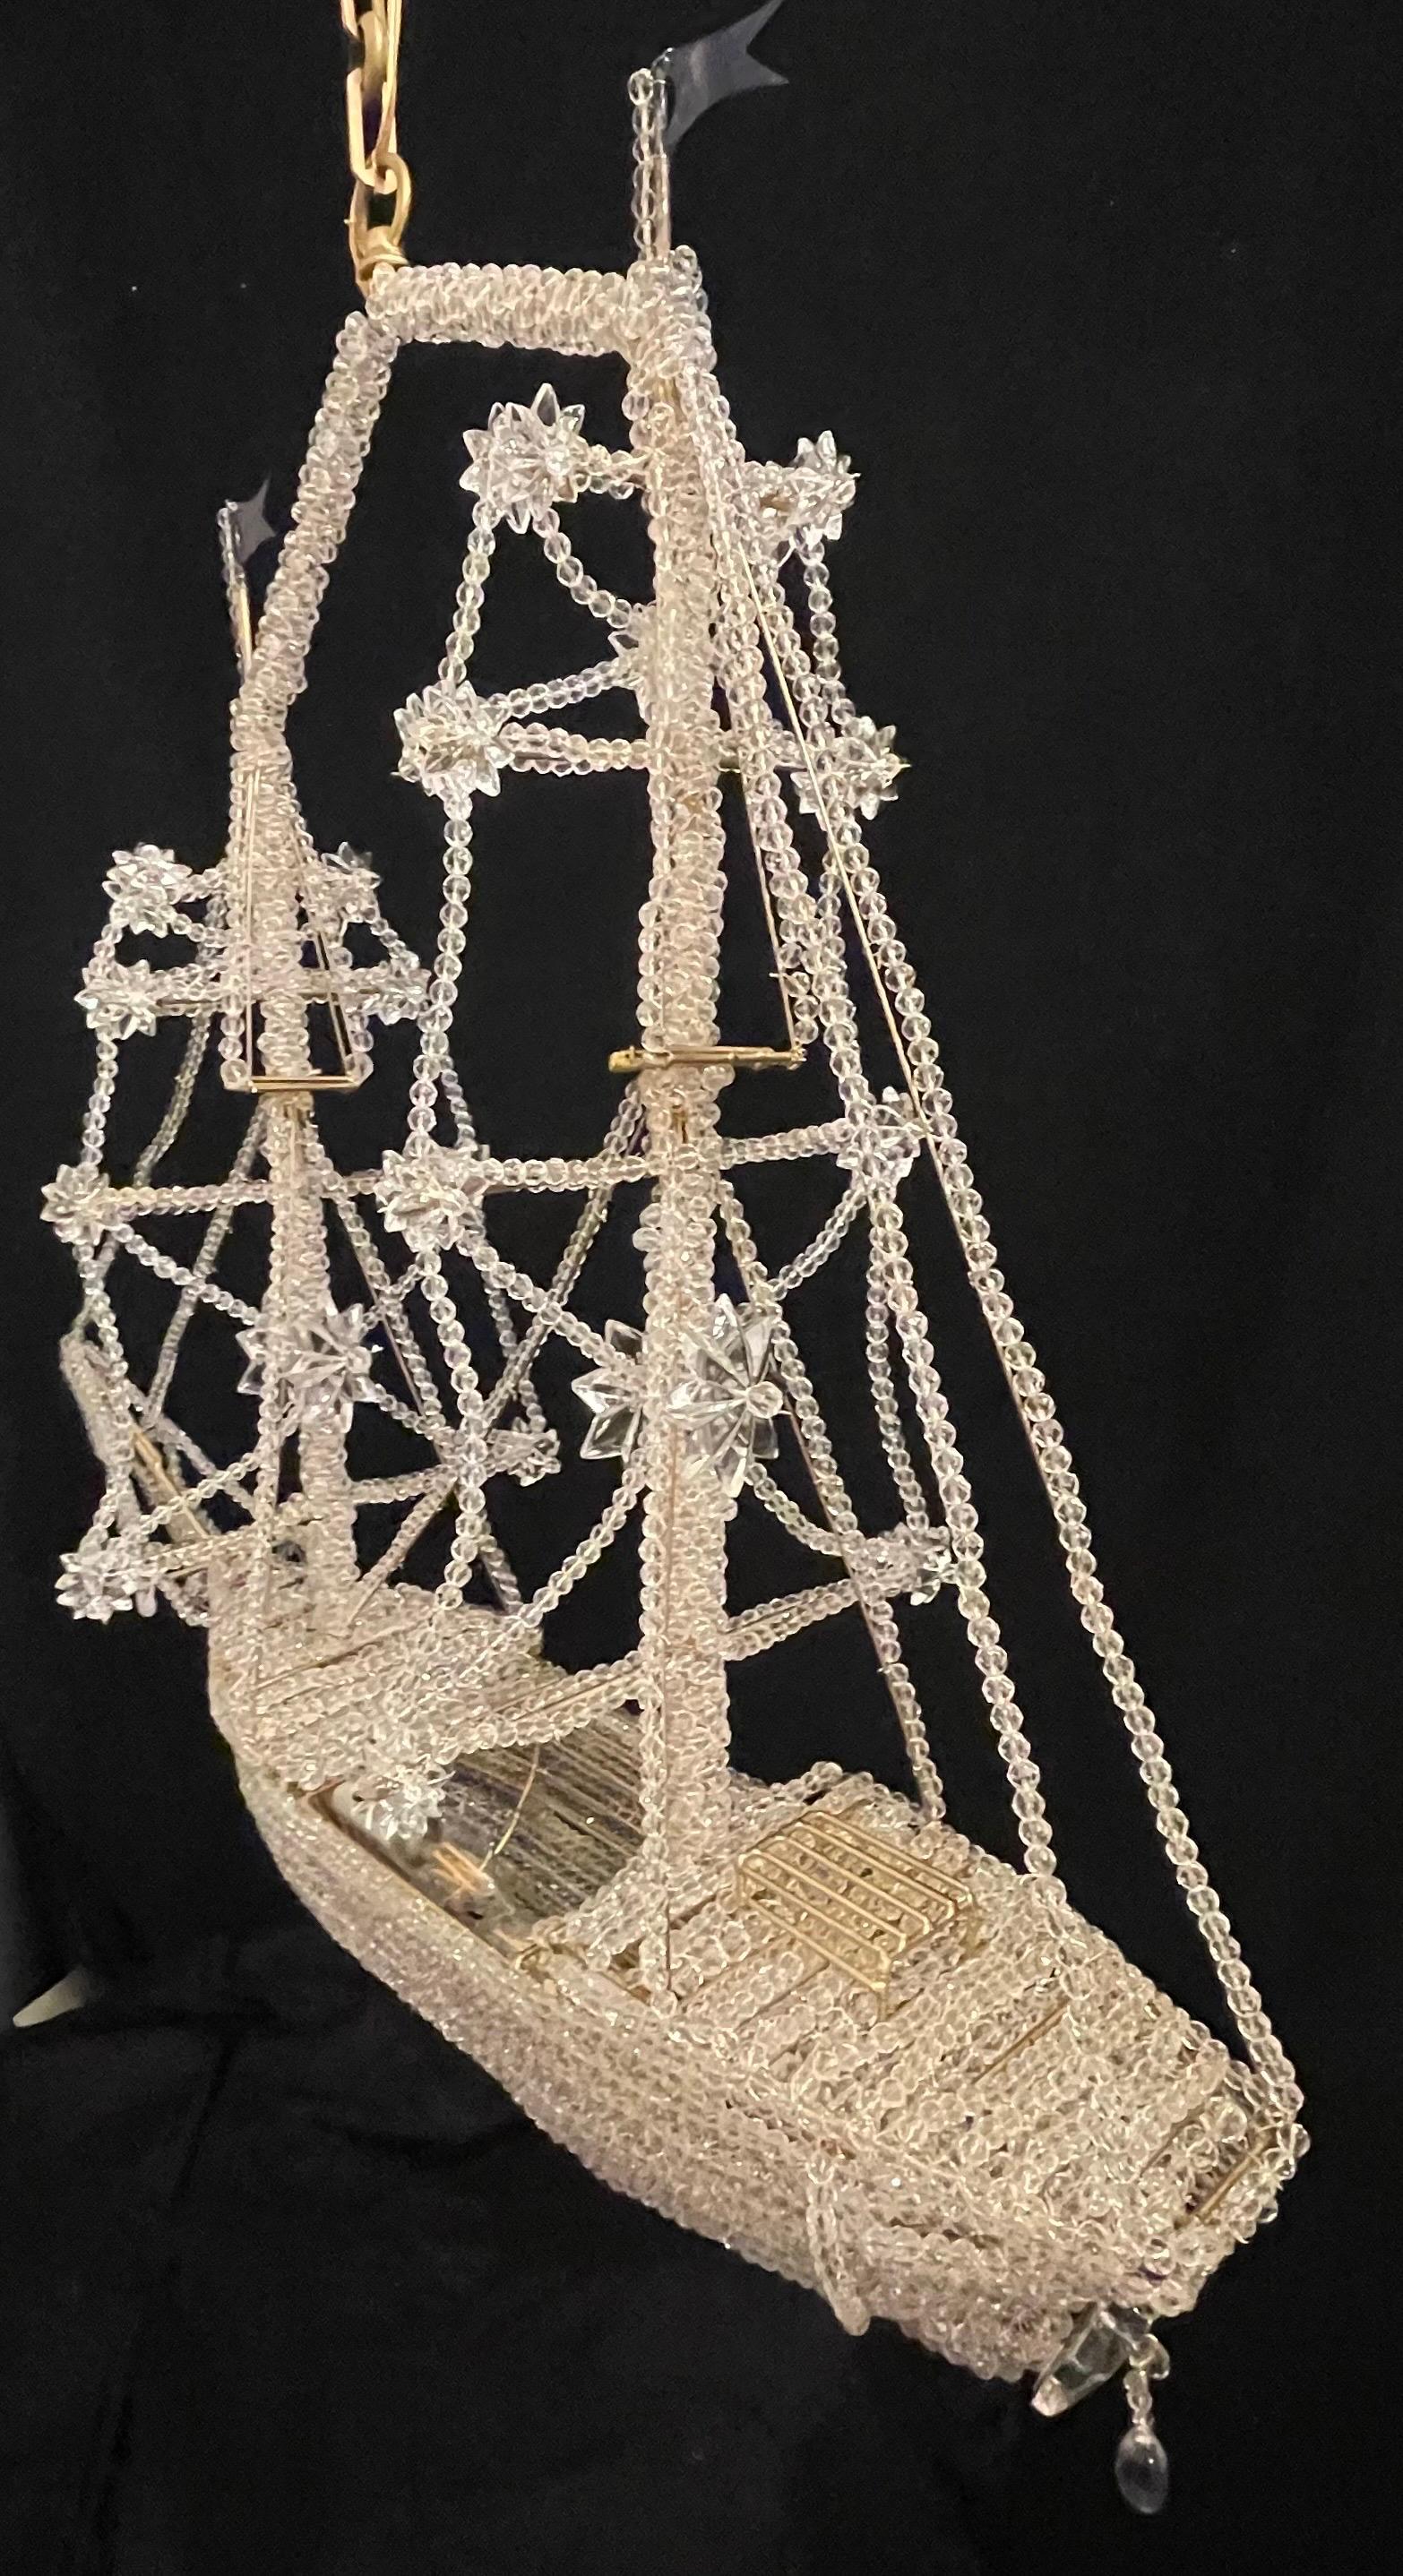 Beautiful Vintage Large Italian Crystal Beaded Gilt Boat Chandelier Ship Fixture For Sale 4